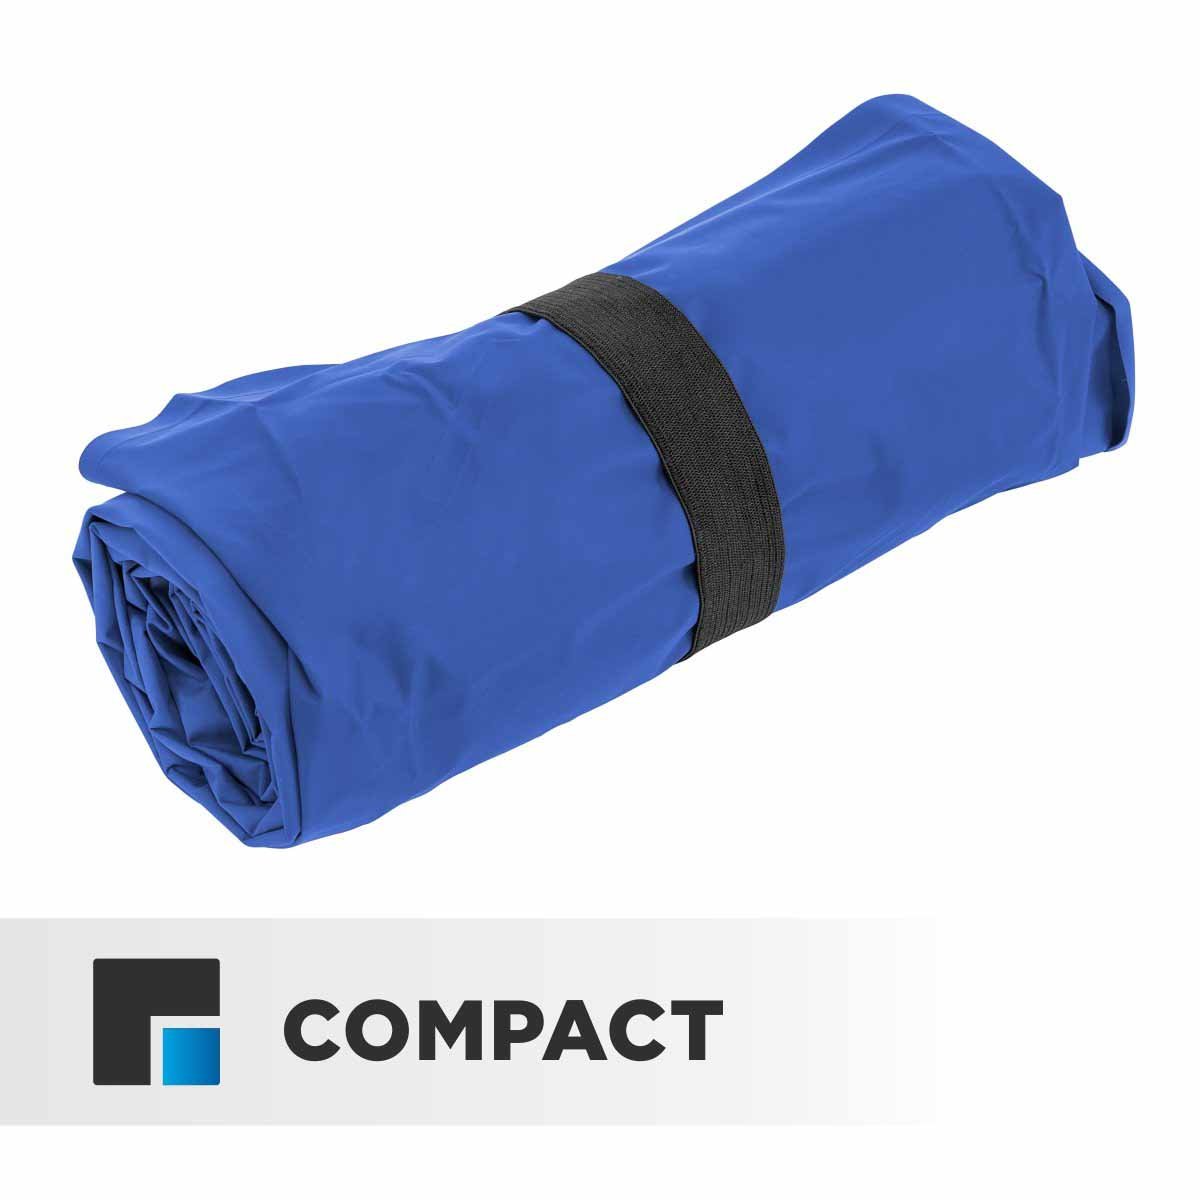 2-inch Waterproof Camping Self Inflating Sleeping Pad is easy to roll up and compact